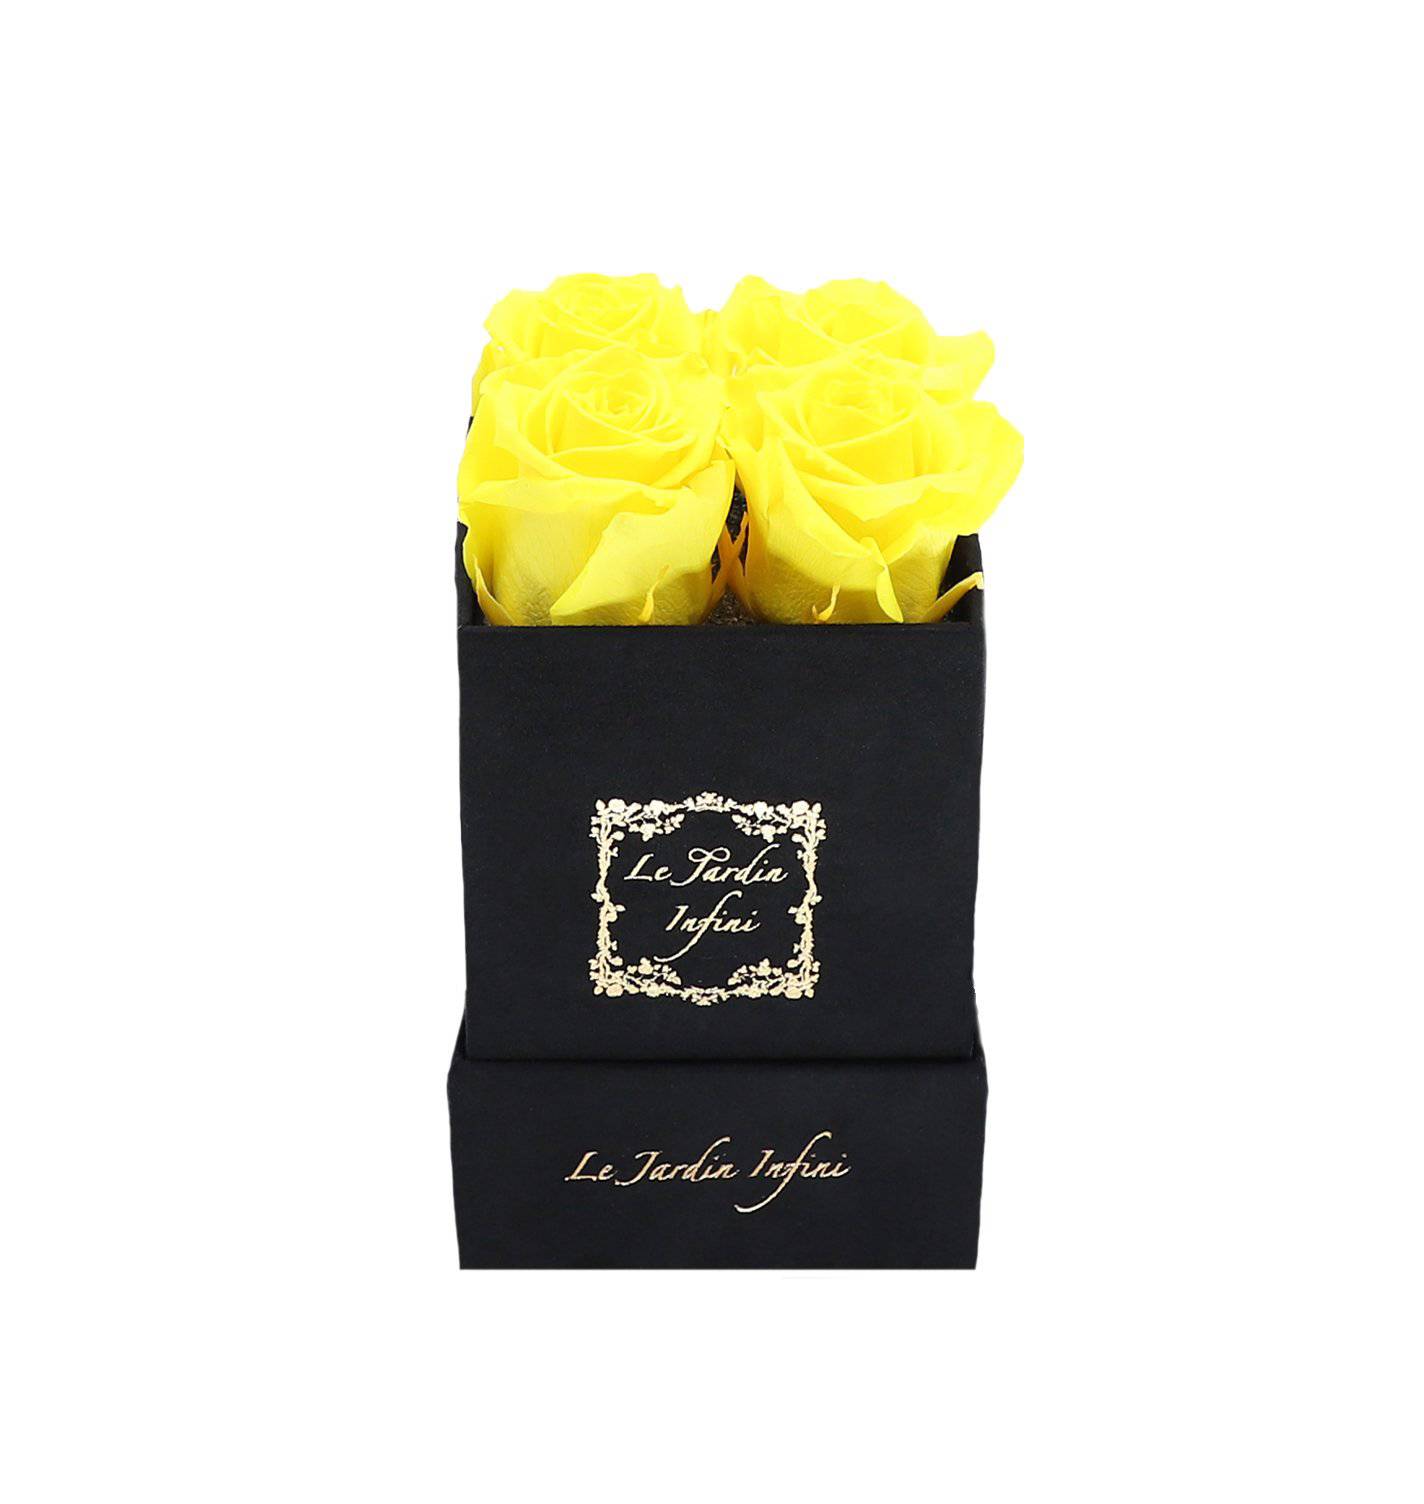 Yellow Preserved Roses - Small Square Black Suede Box - Le Jardin Infini Roses in a Box